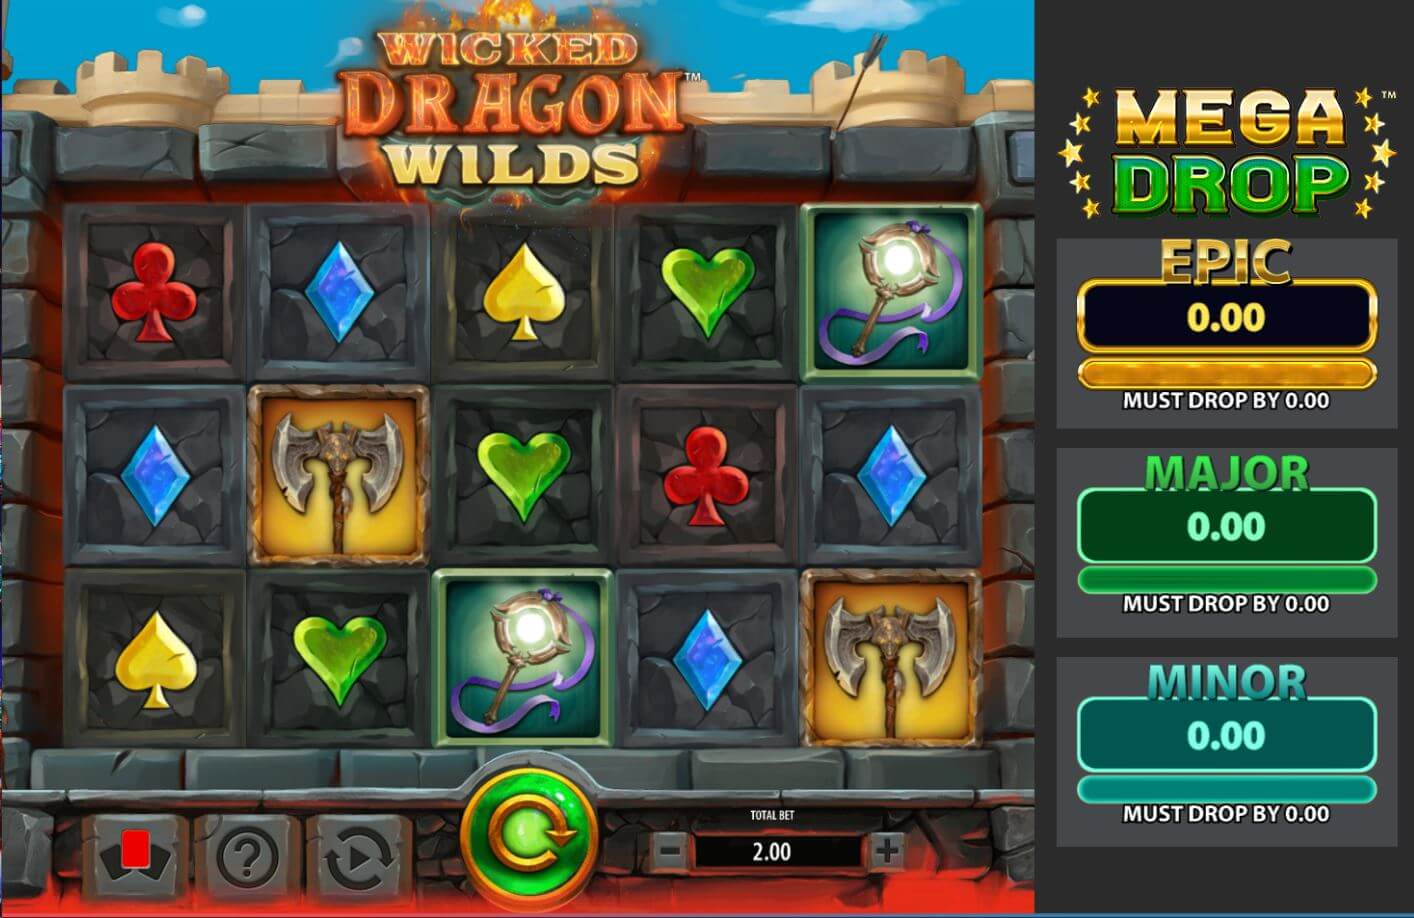 Wicked Dragon Wilds Slot Gameplay